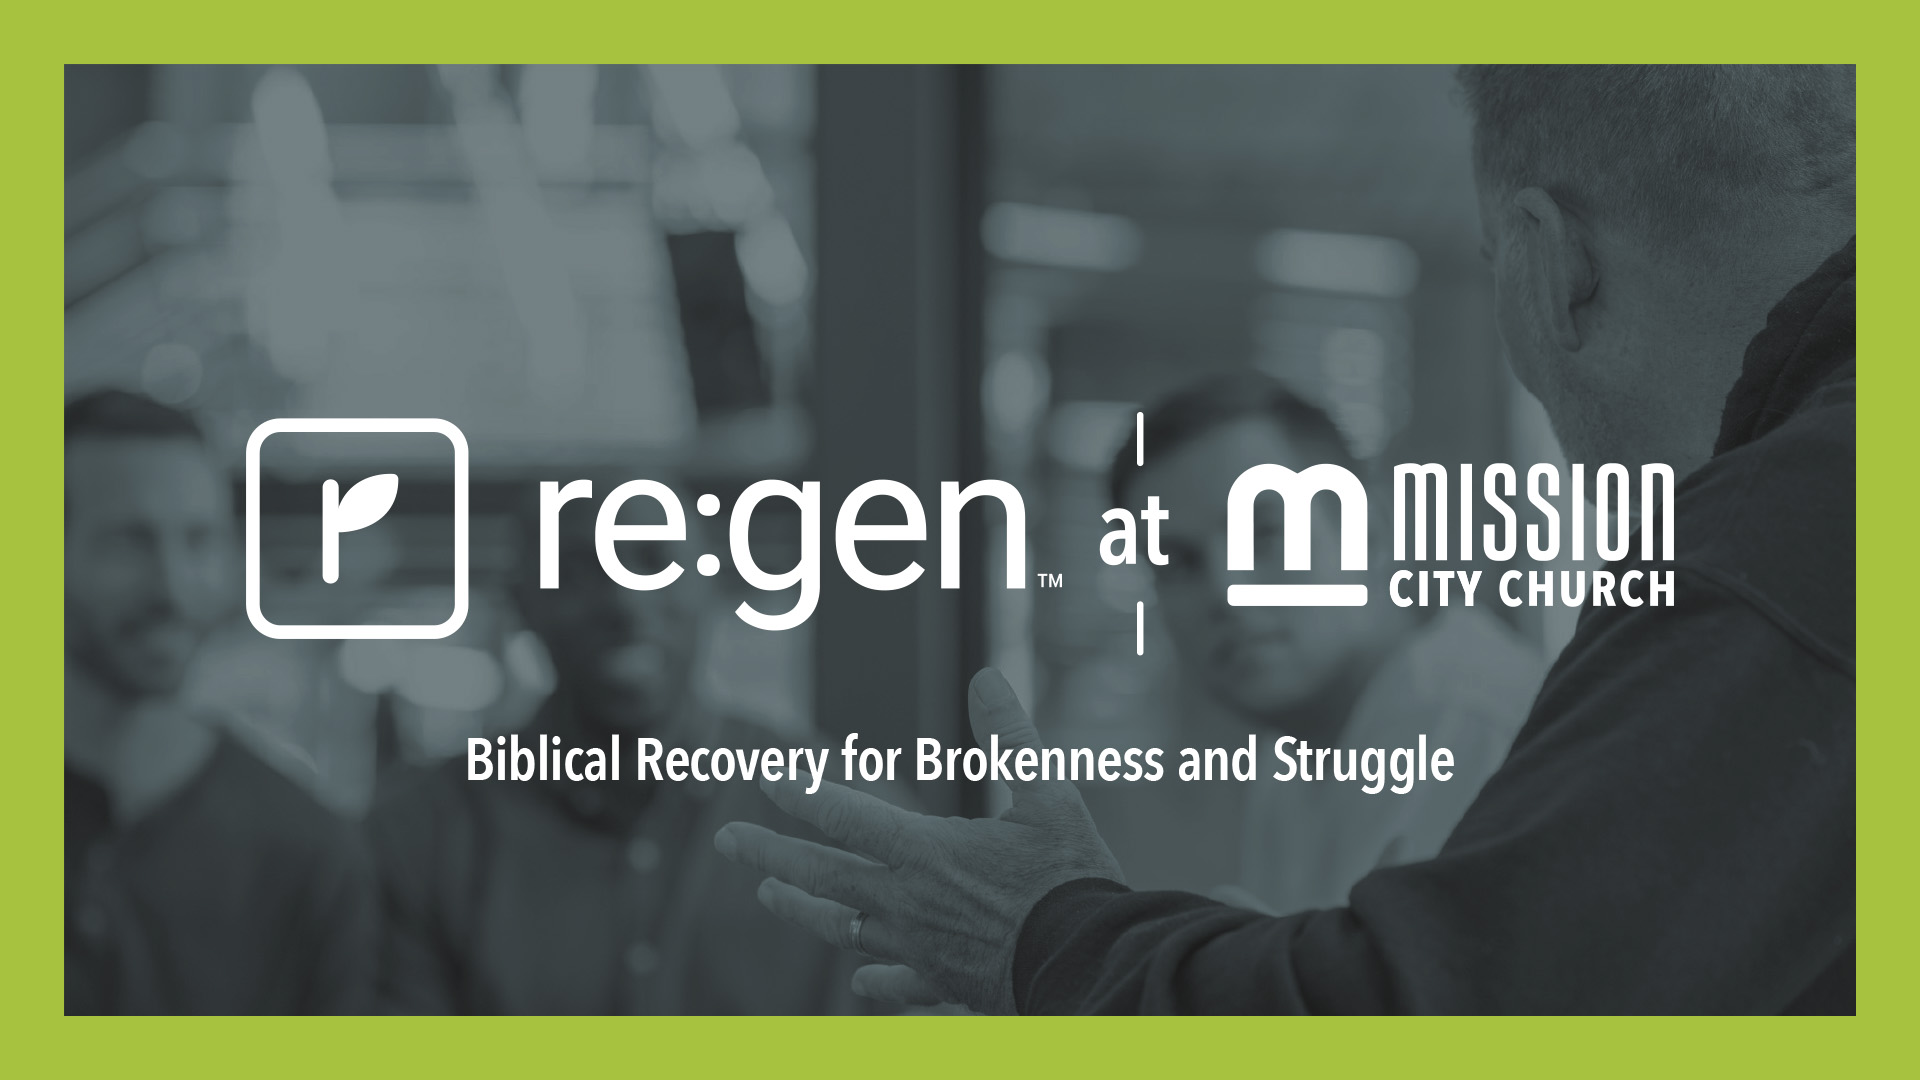 ReGeneration Recovery at Mission City in San Antonio. Biblical Healing for Brokenness and Struggles.